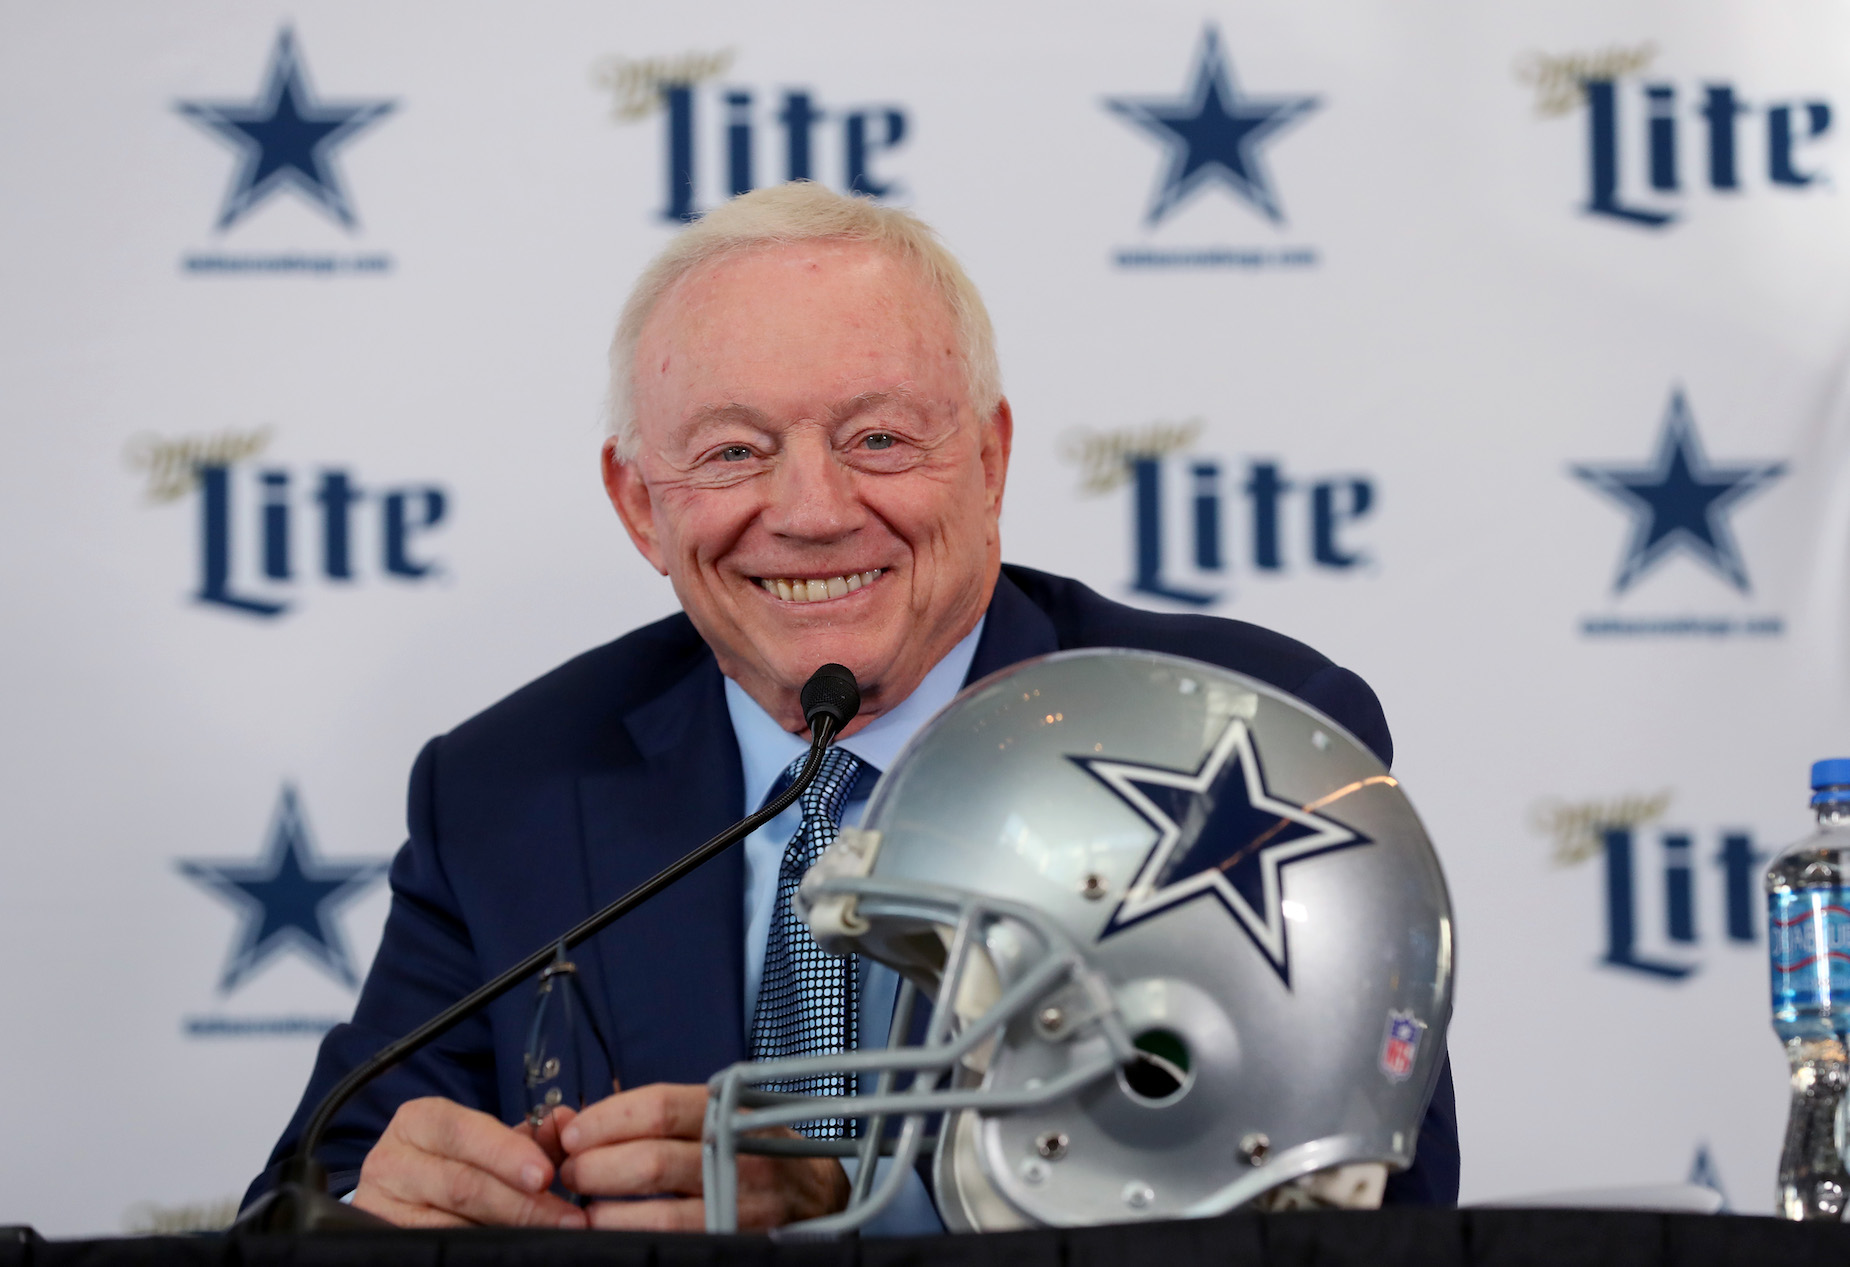 Dallas Cowboys owner Jerry Jones believes that his $1.2 billion investment will allow fans to watch football in person this fall.